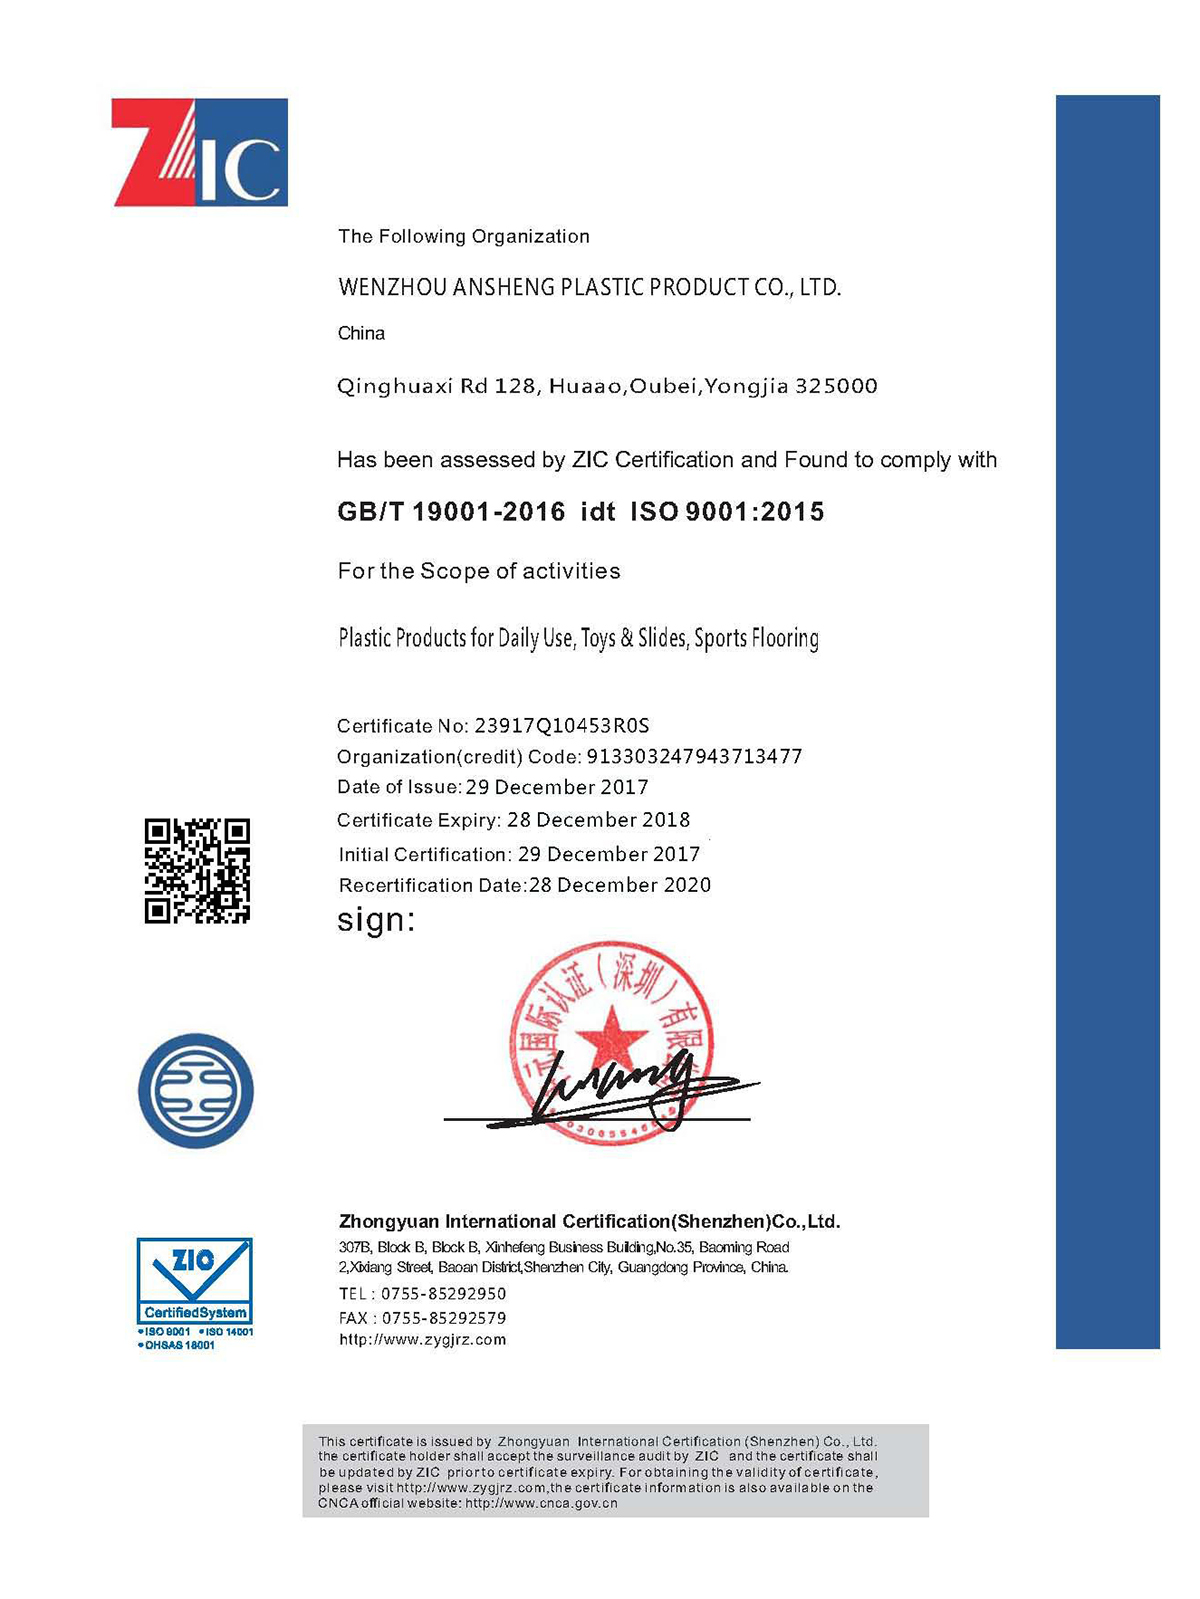 ISO90001